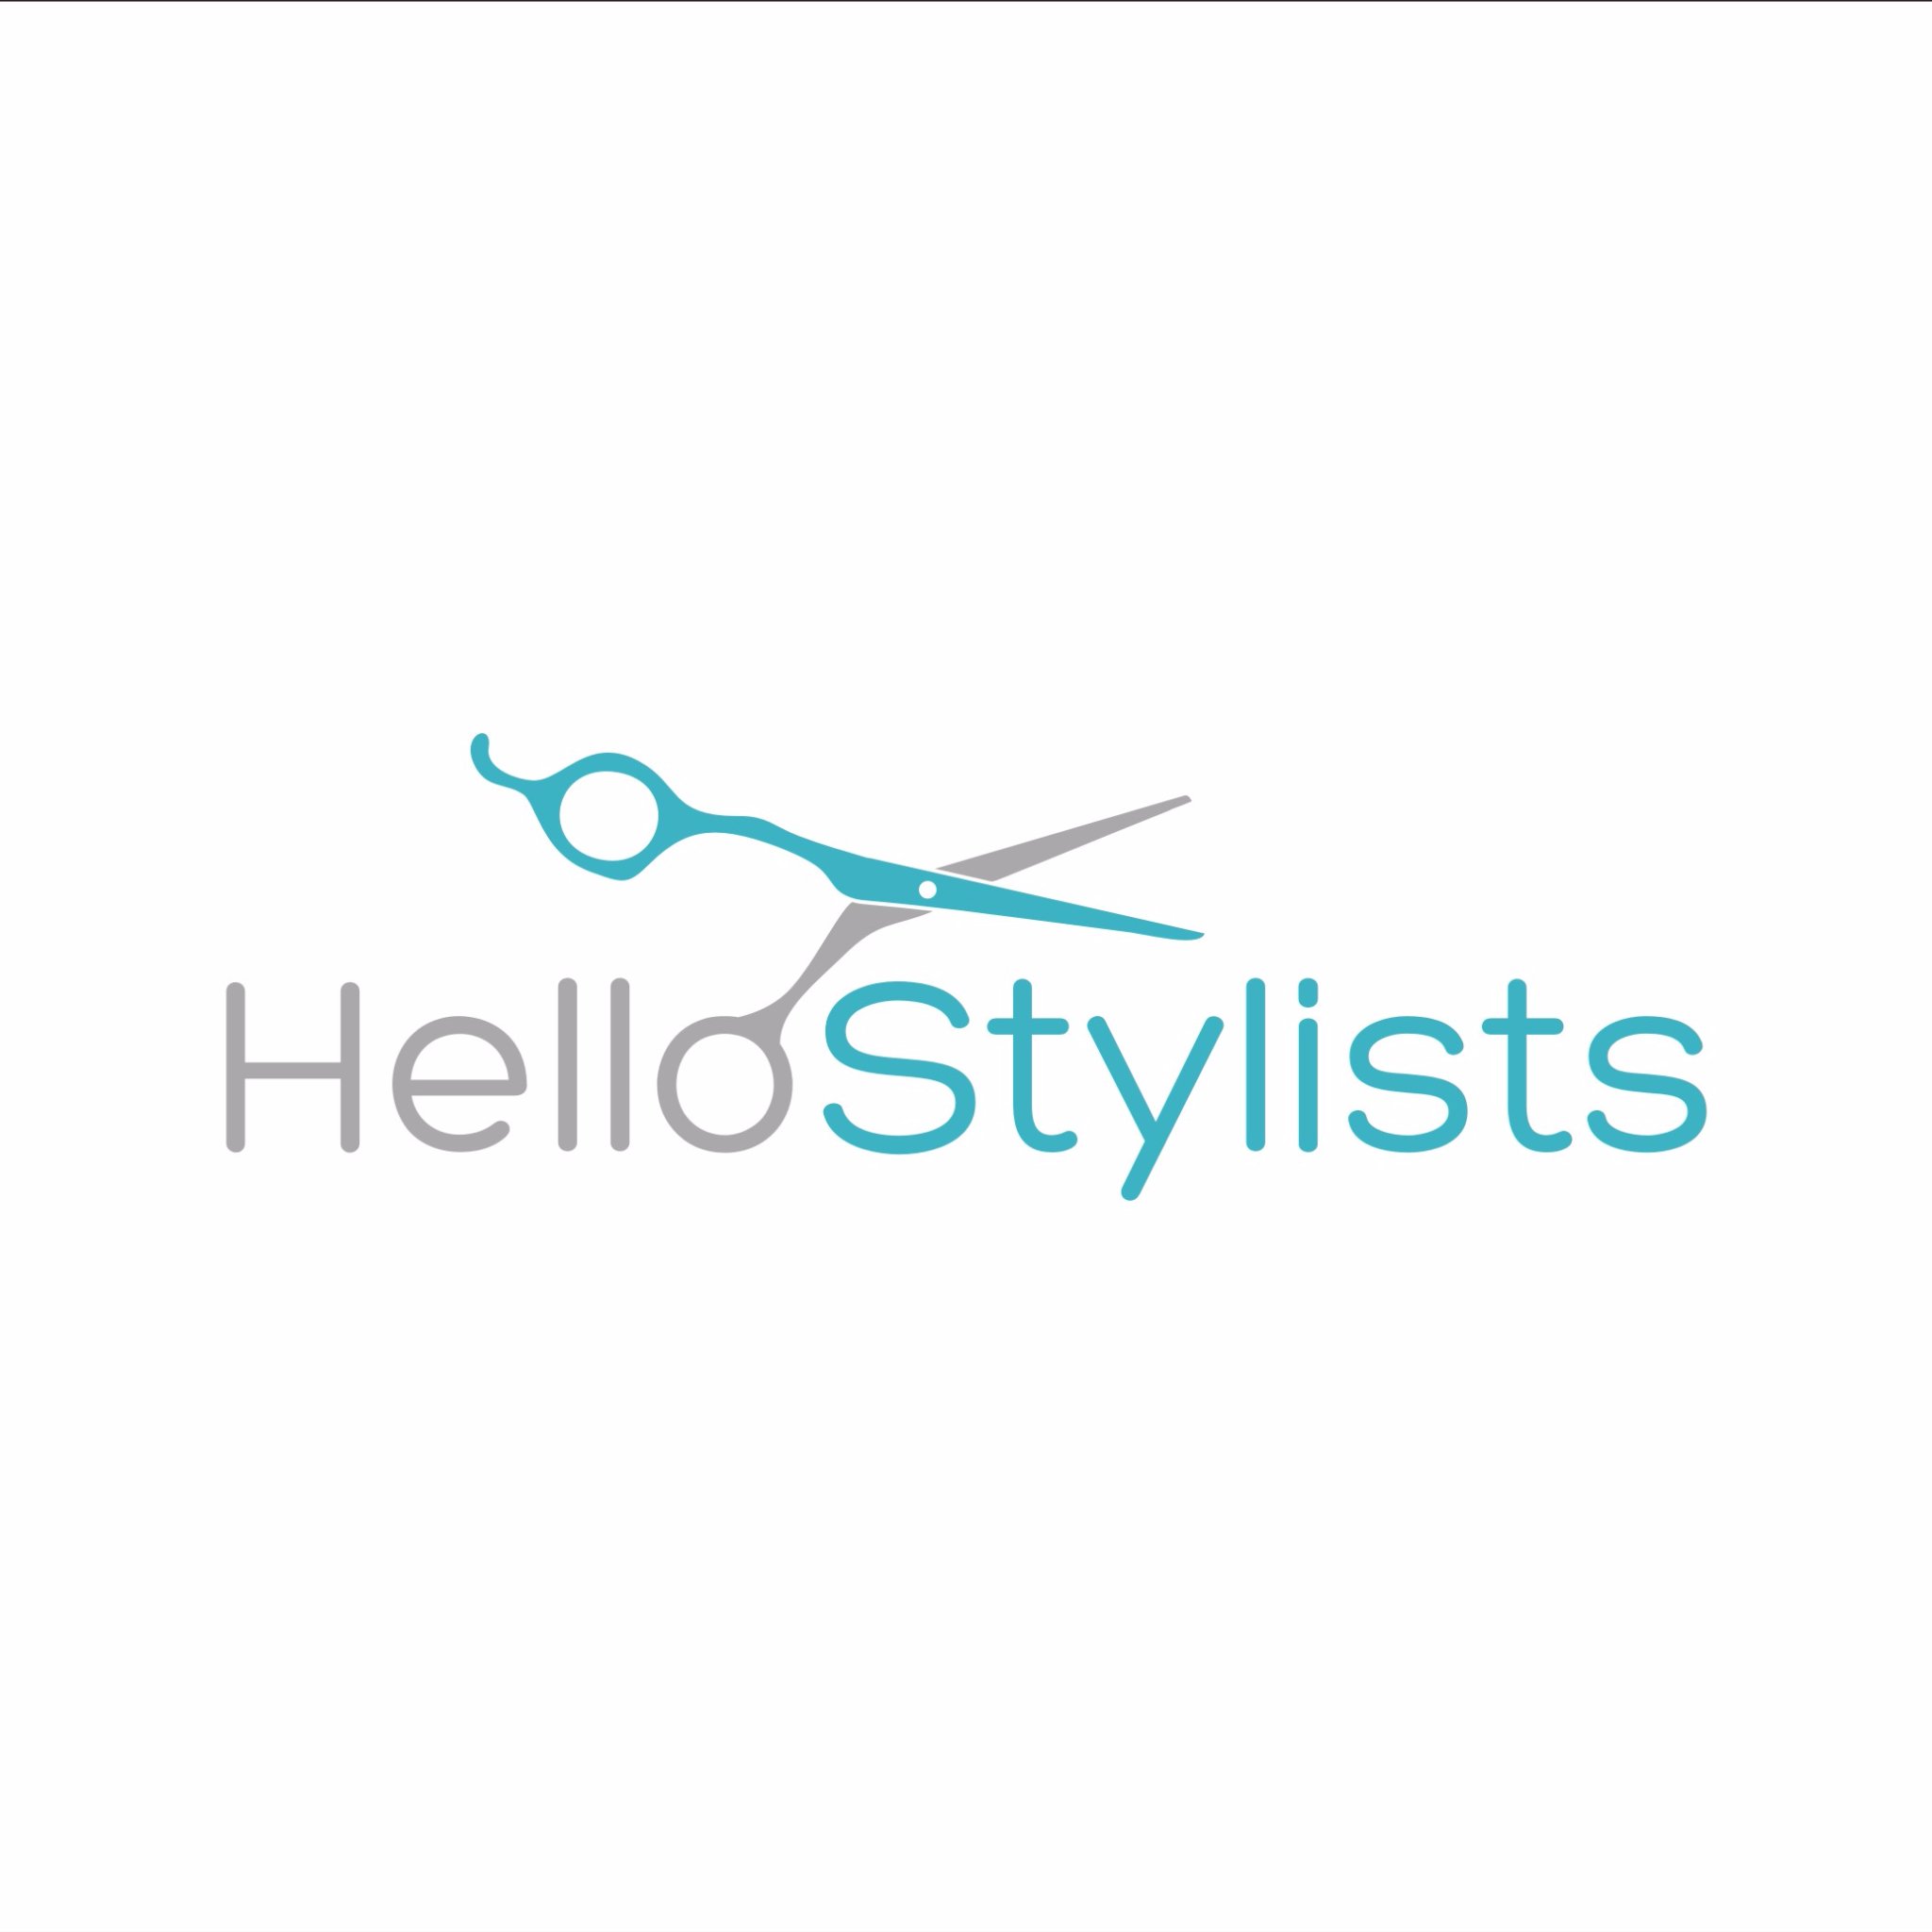 Hello Stylists.Book your Hair Stylist. https://t.co/c3qvRRZW8x (live soon in UAE) Tag us with your hairstyle photo to recommend your stylist! iman@hellostylists.com